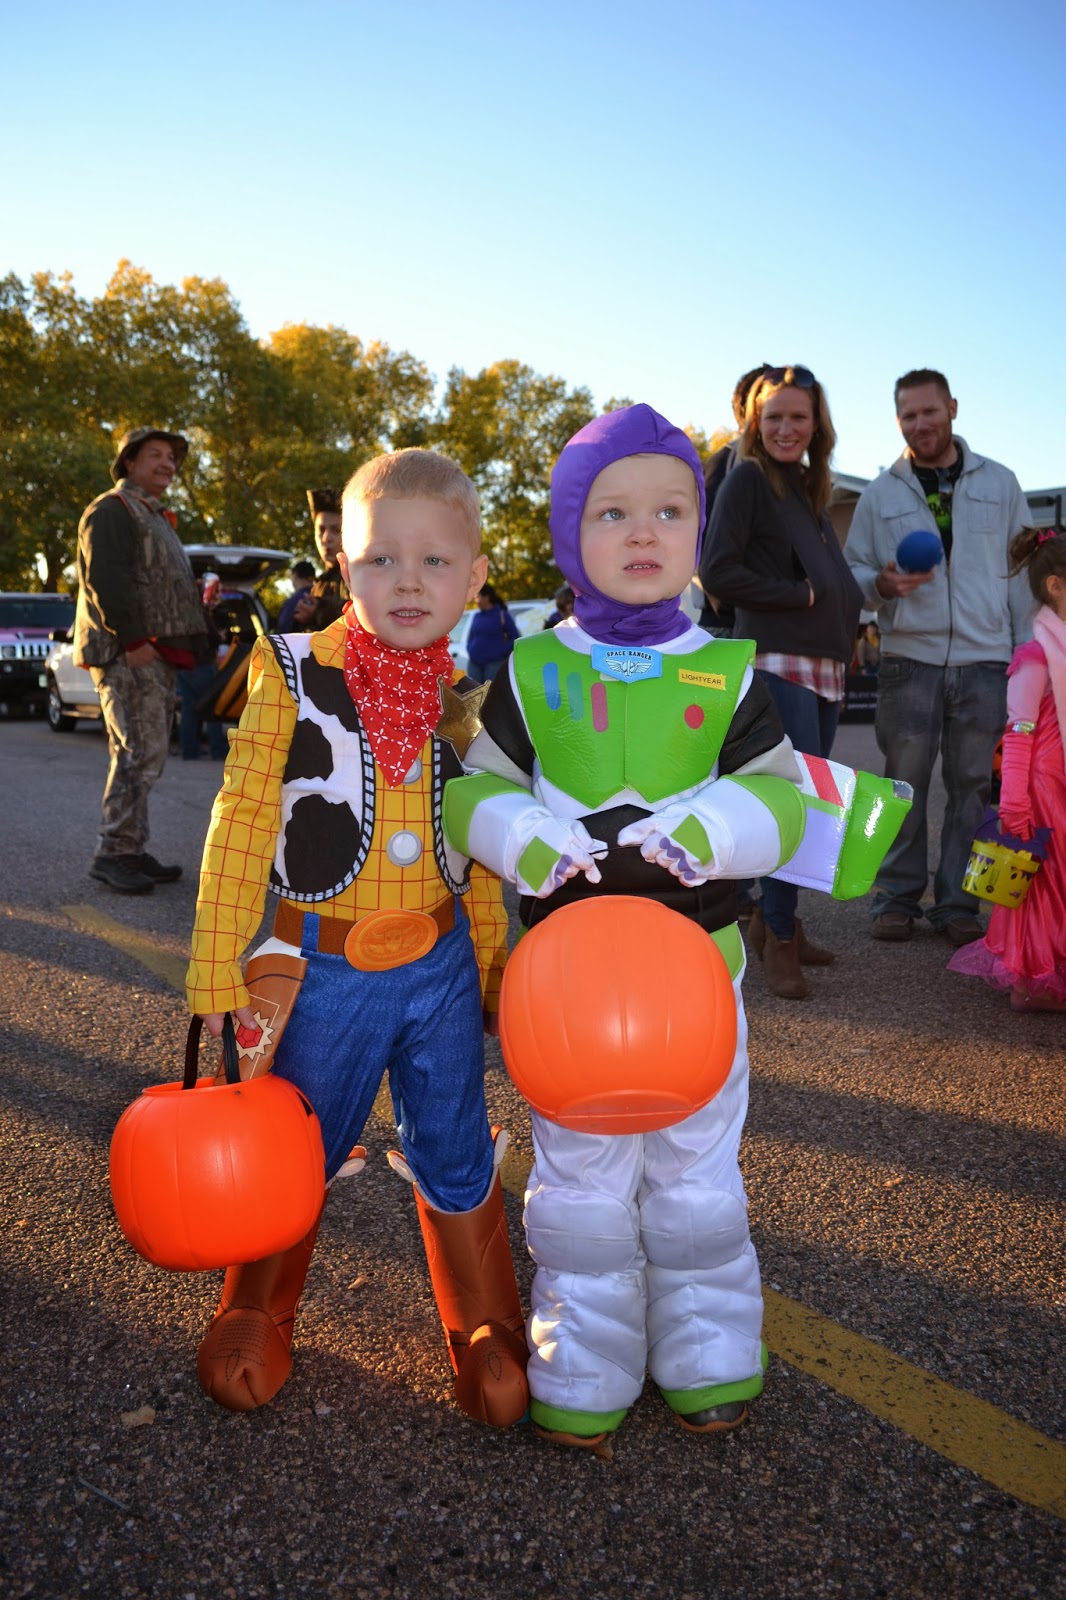 Halloween Meets Toy Story | Building Our Story